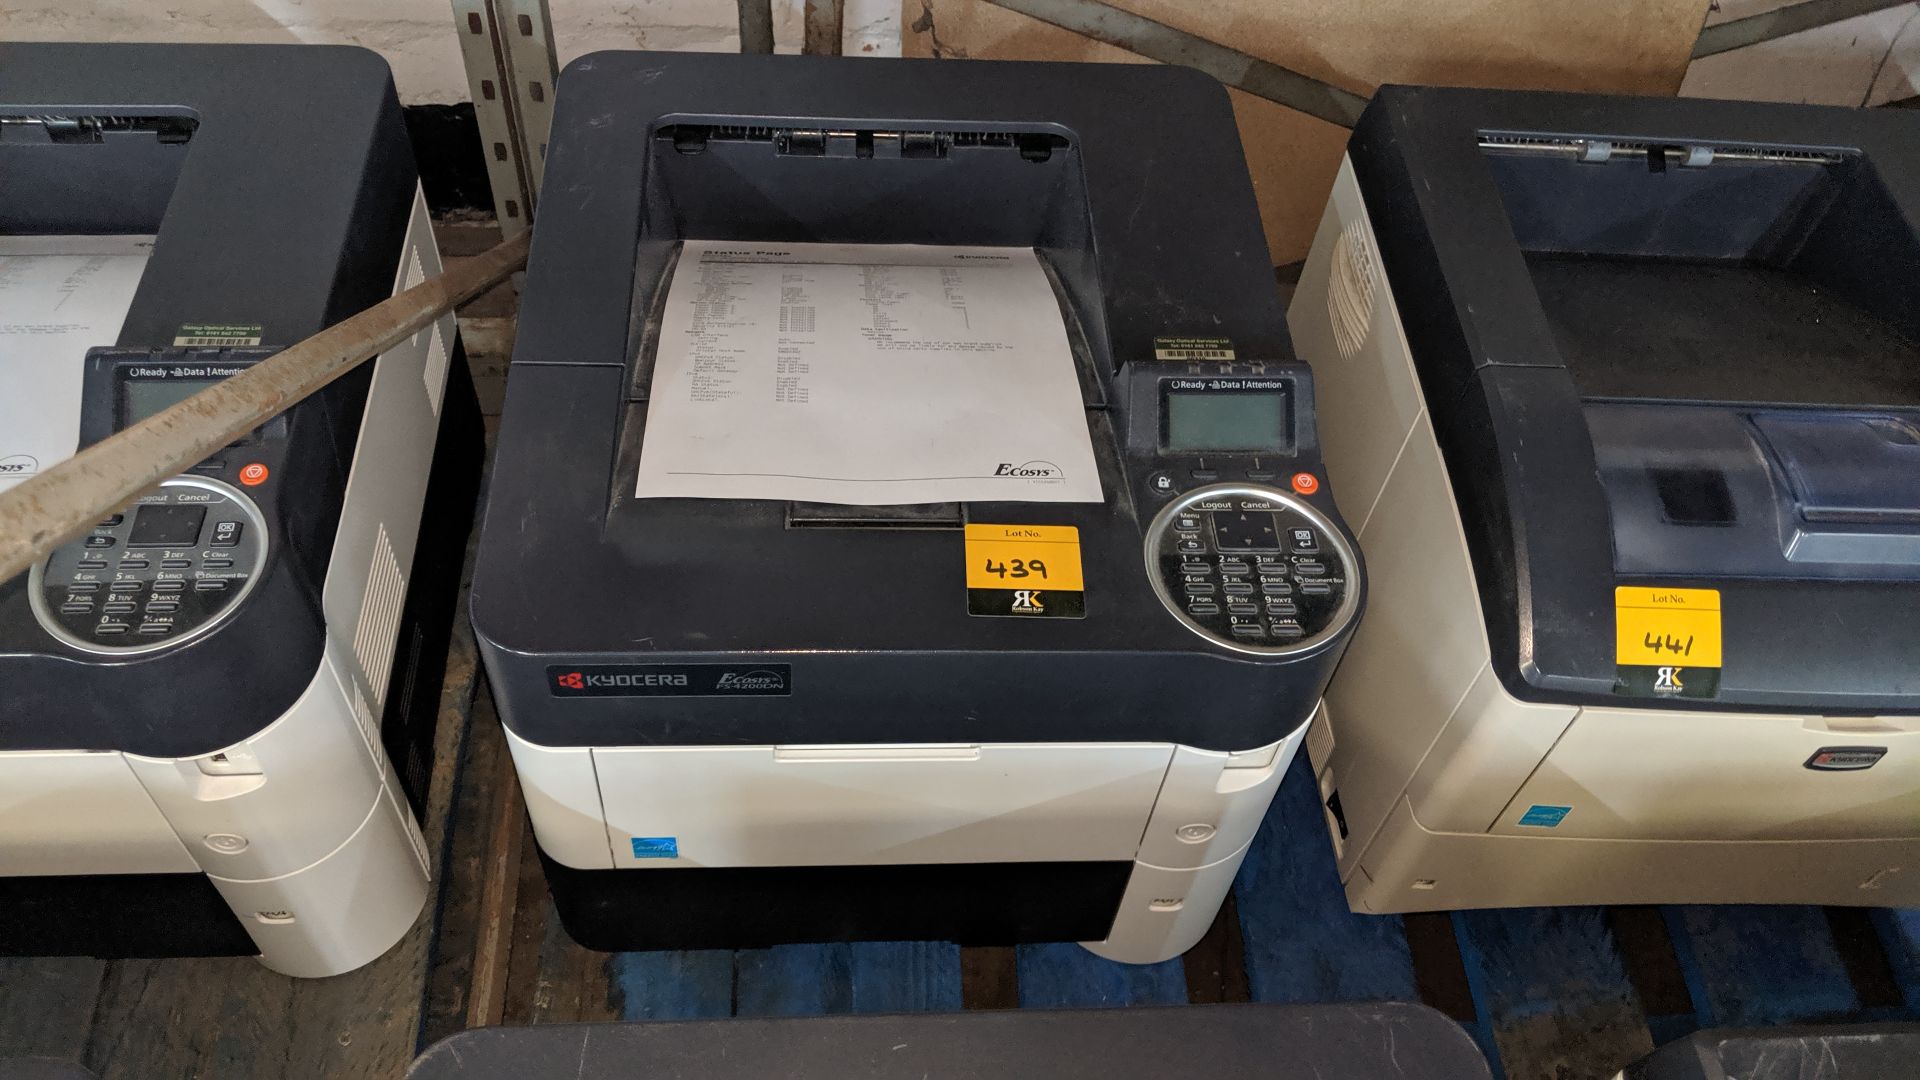 Kyocera A4 desktop laser printer model FS-4200DN. This is one of a large number of lots being sold - Image 2 of 2